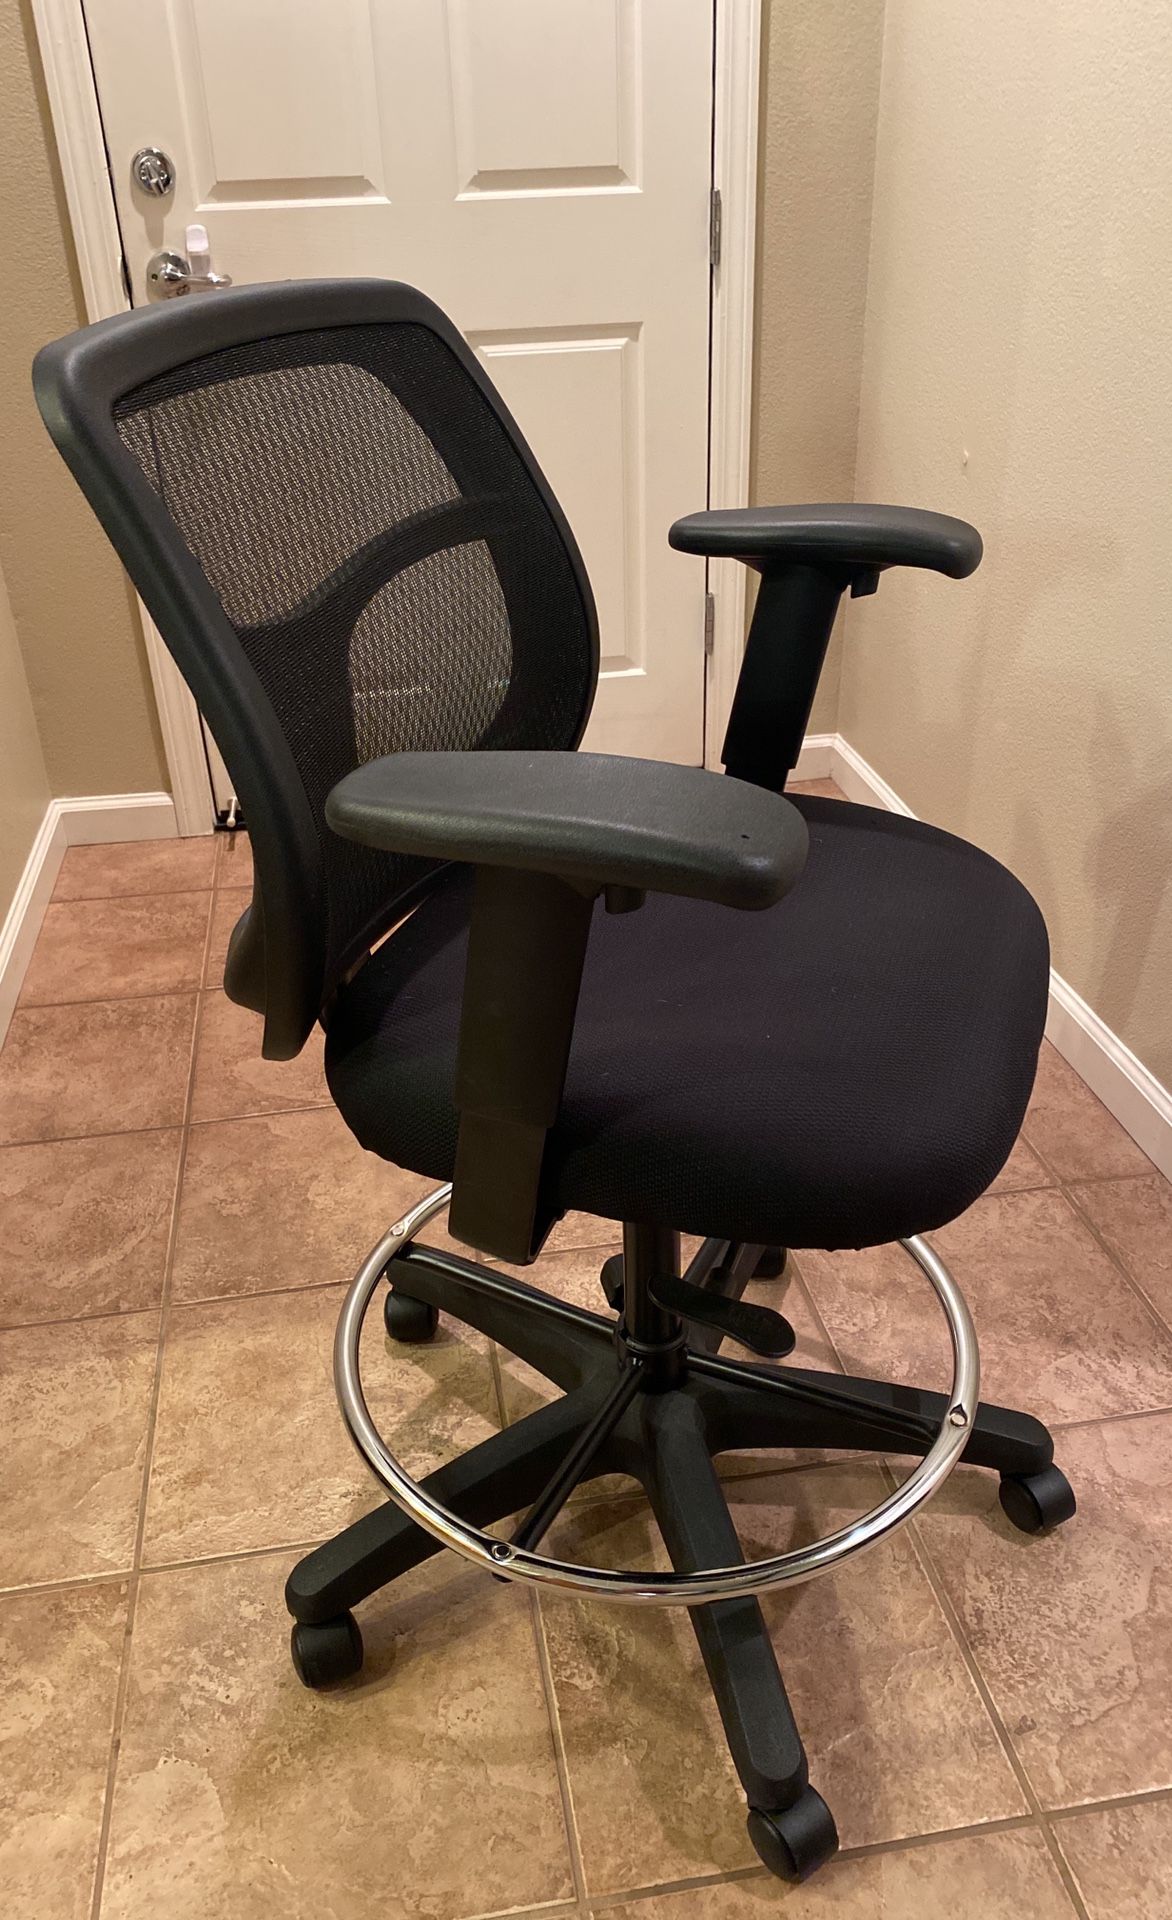 Home/Work Office Chair